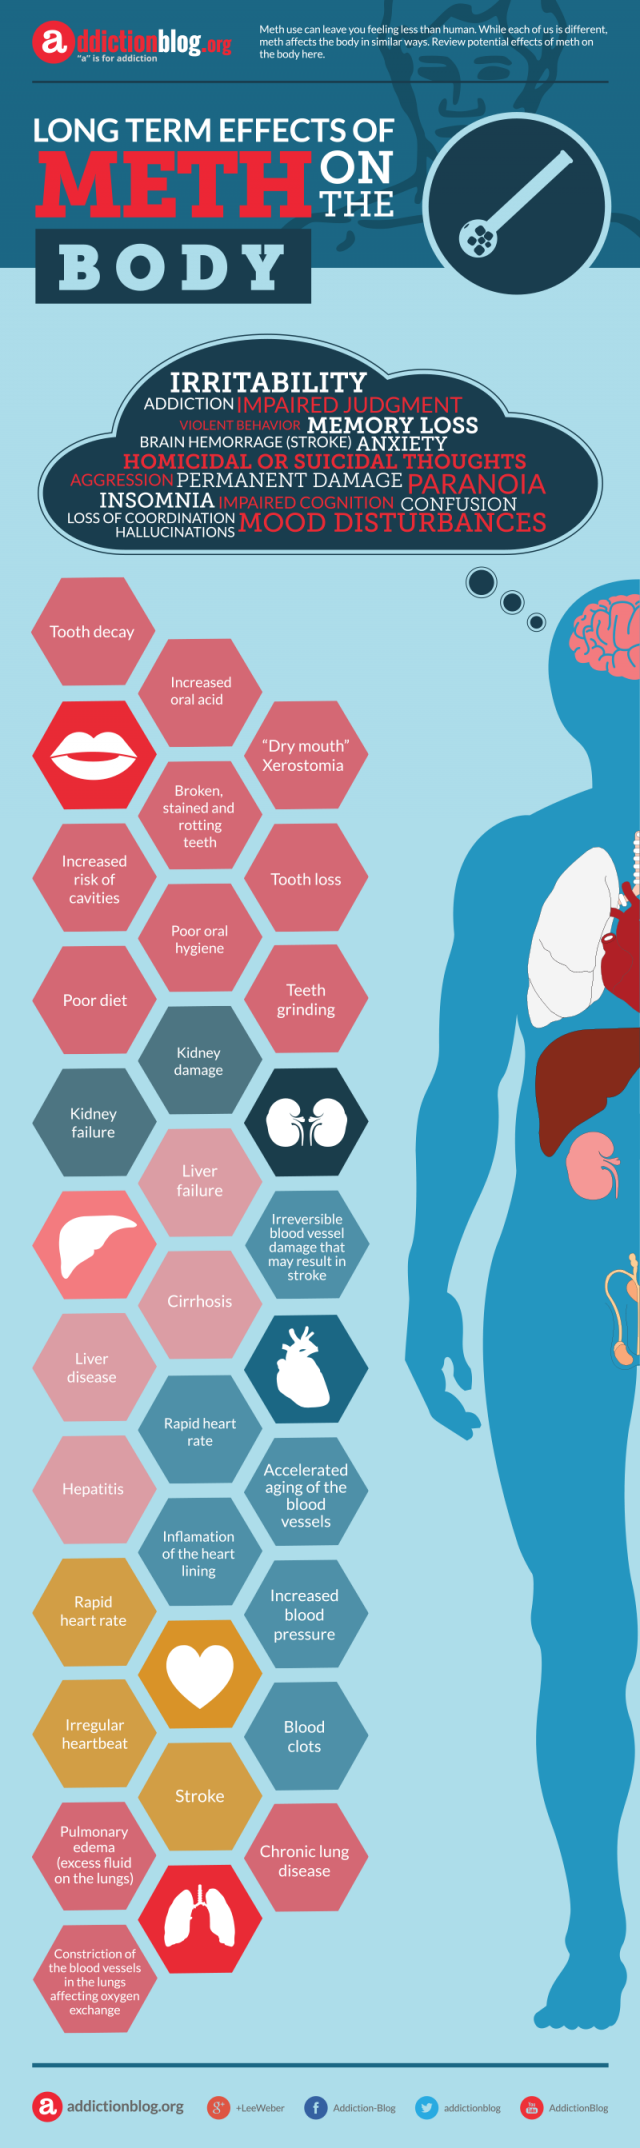 Long term effects of meth on the body (INFOGRAPHIC)